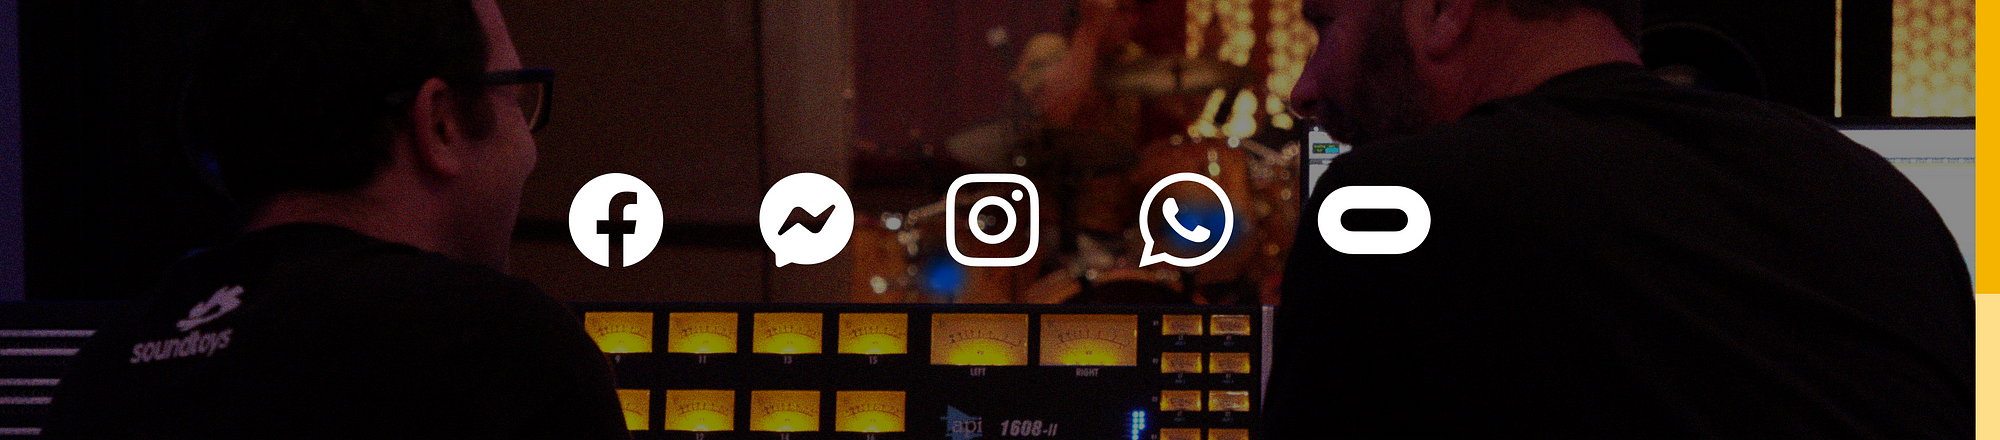 Logos for Facebook-owned apps display over a background image.